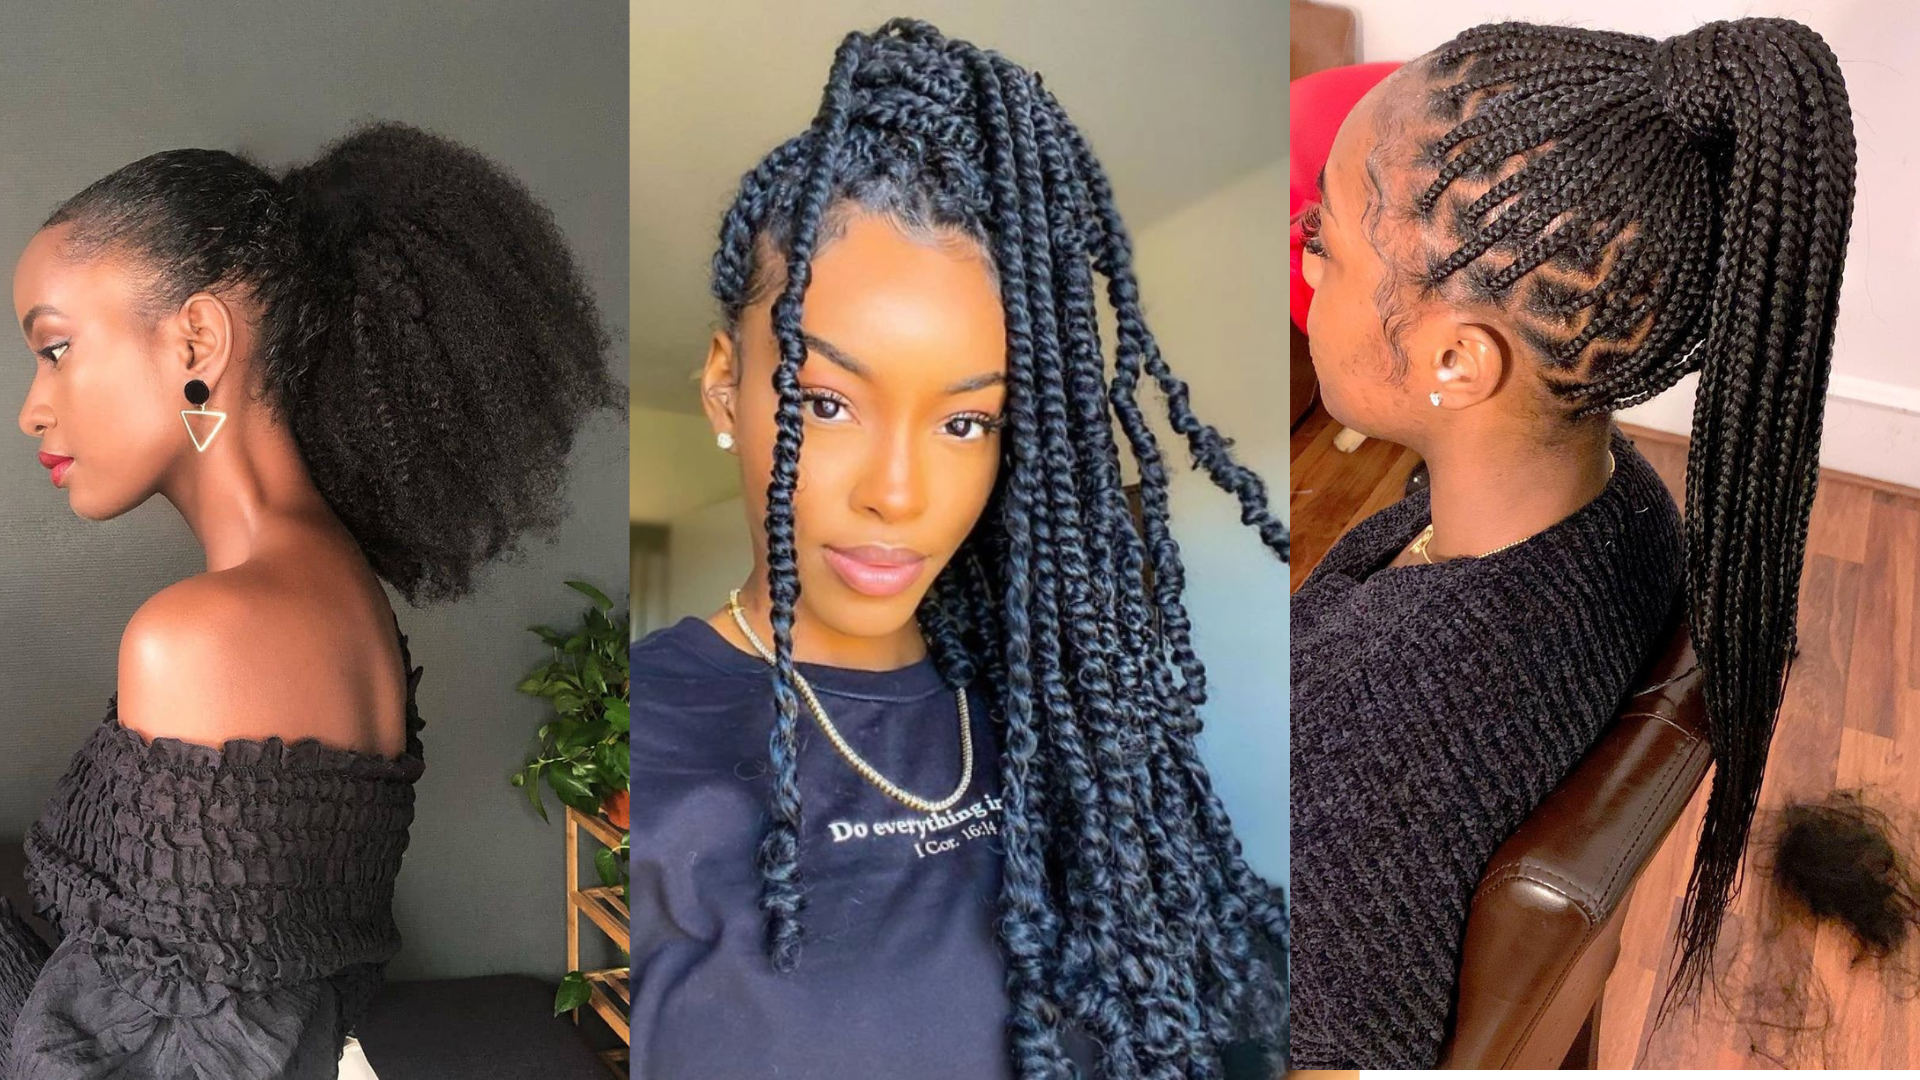 34 Ponytail Hairstyles Perfect for Upping Your Hair Game in 2020